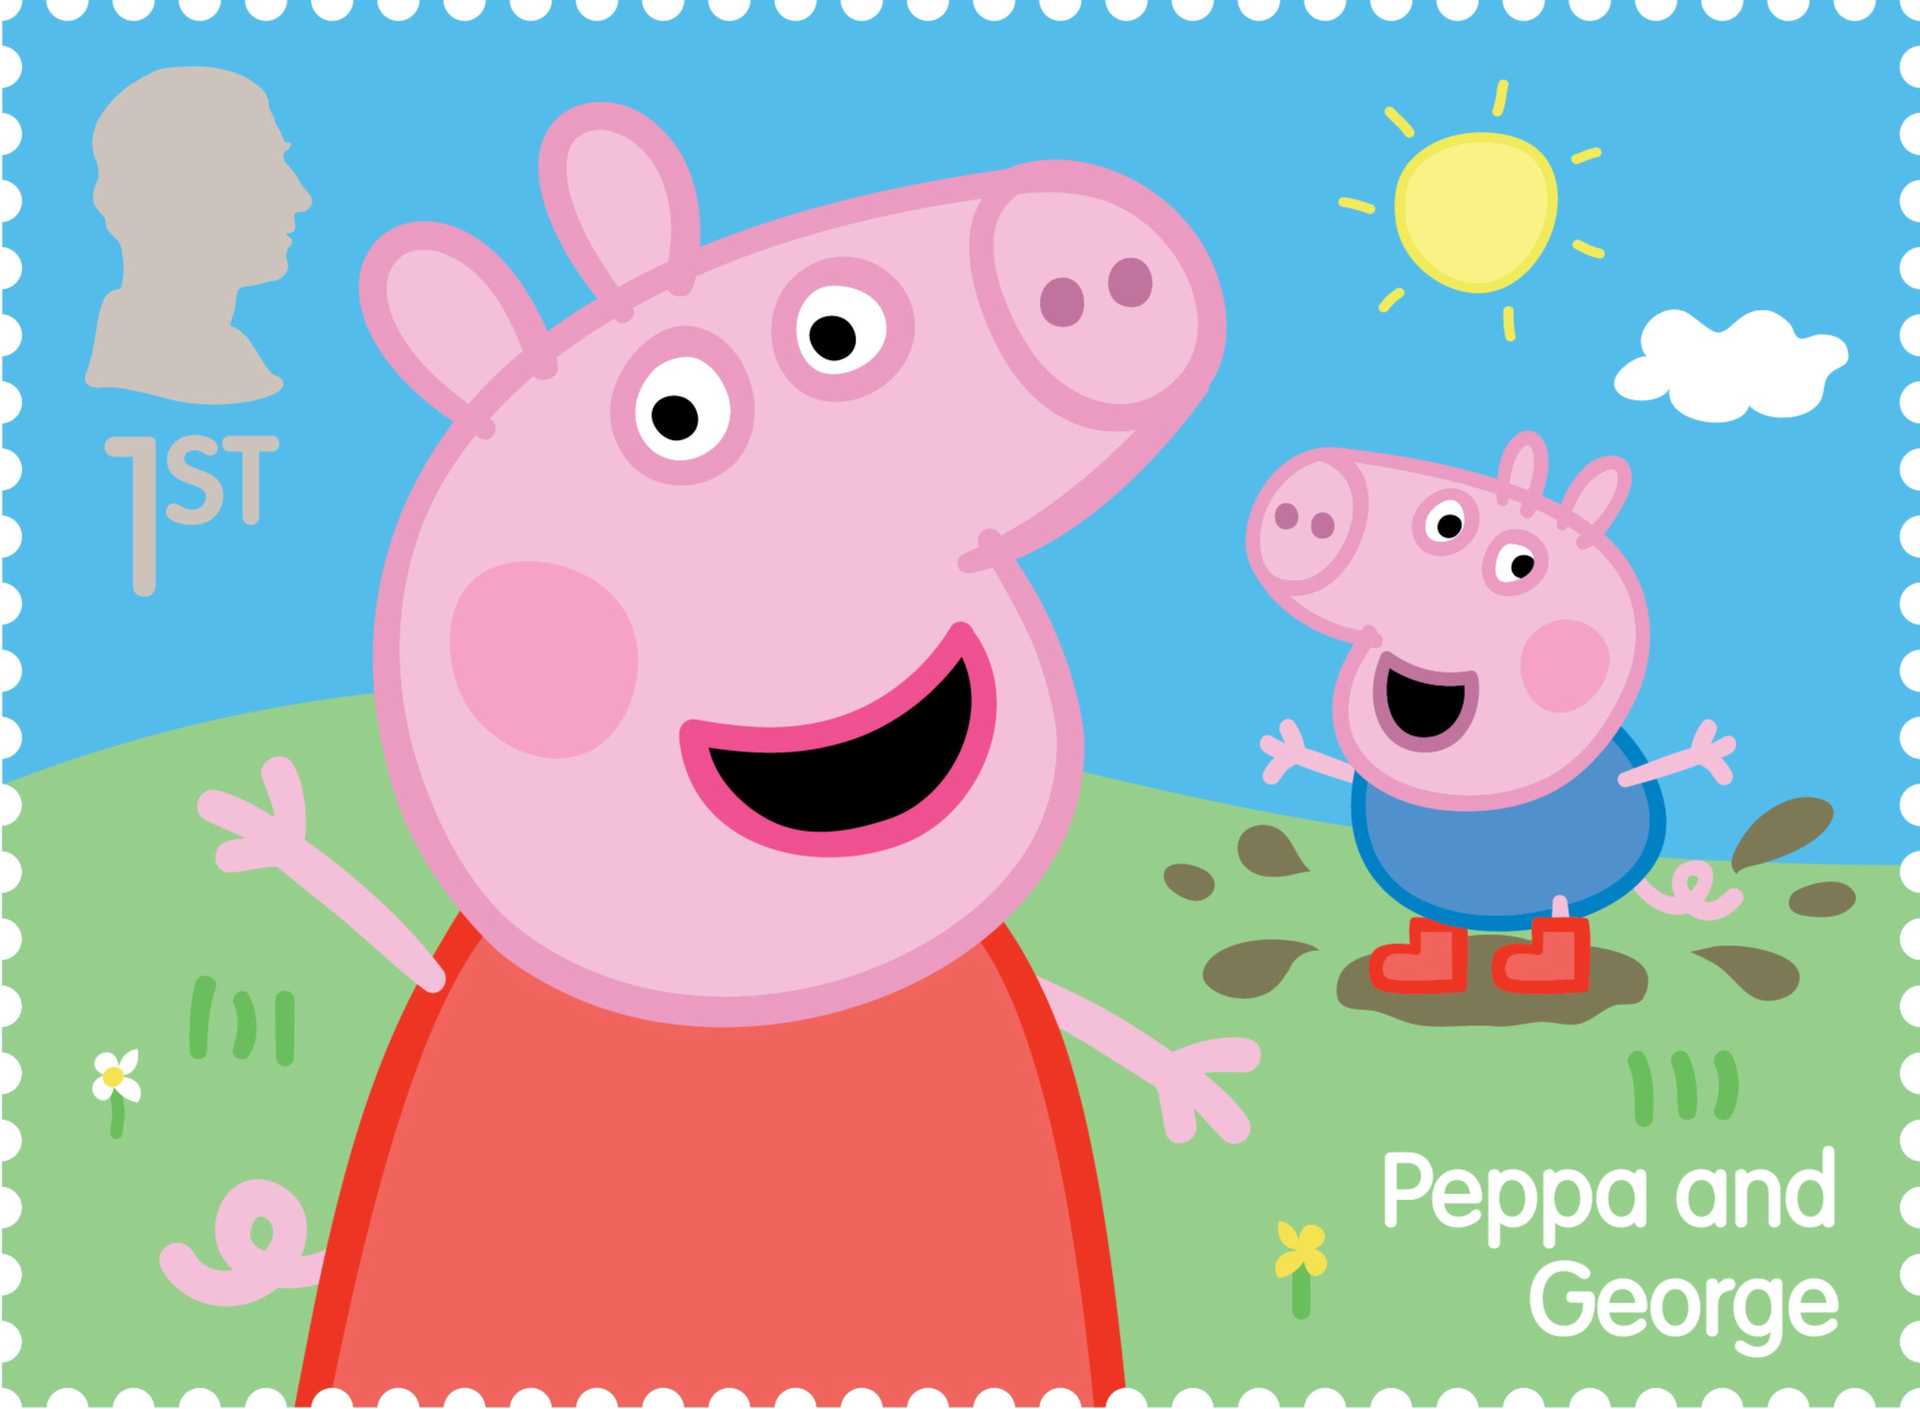 Royal Mail stamp featuring Peppa and George.